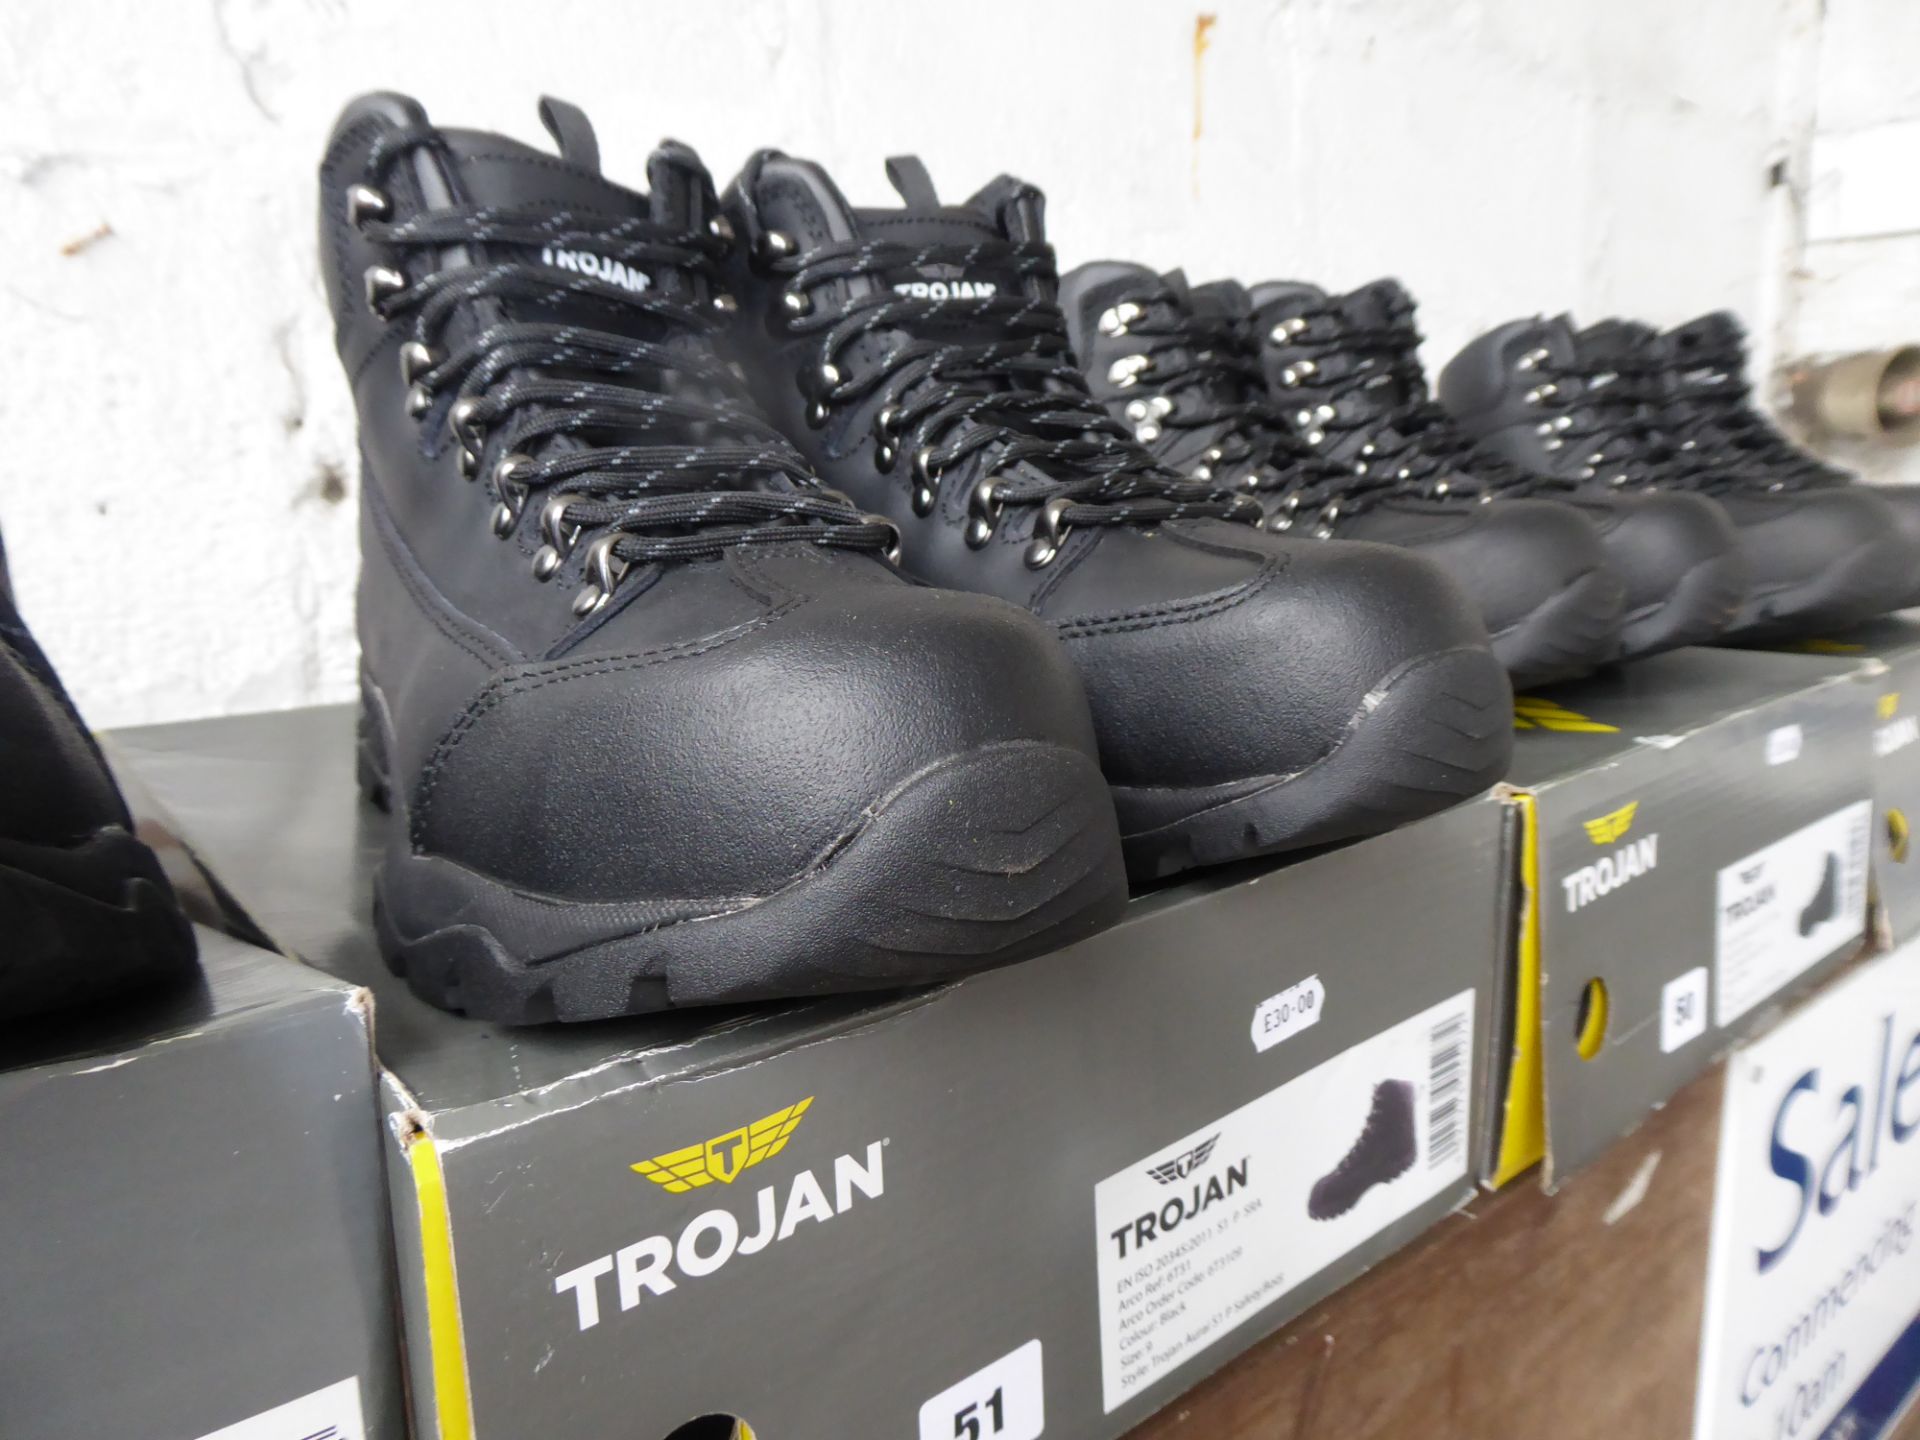 Boxed pair of Trojan safety boots, size 9